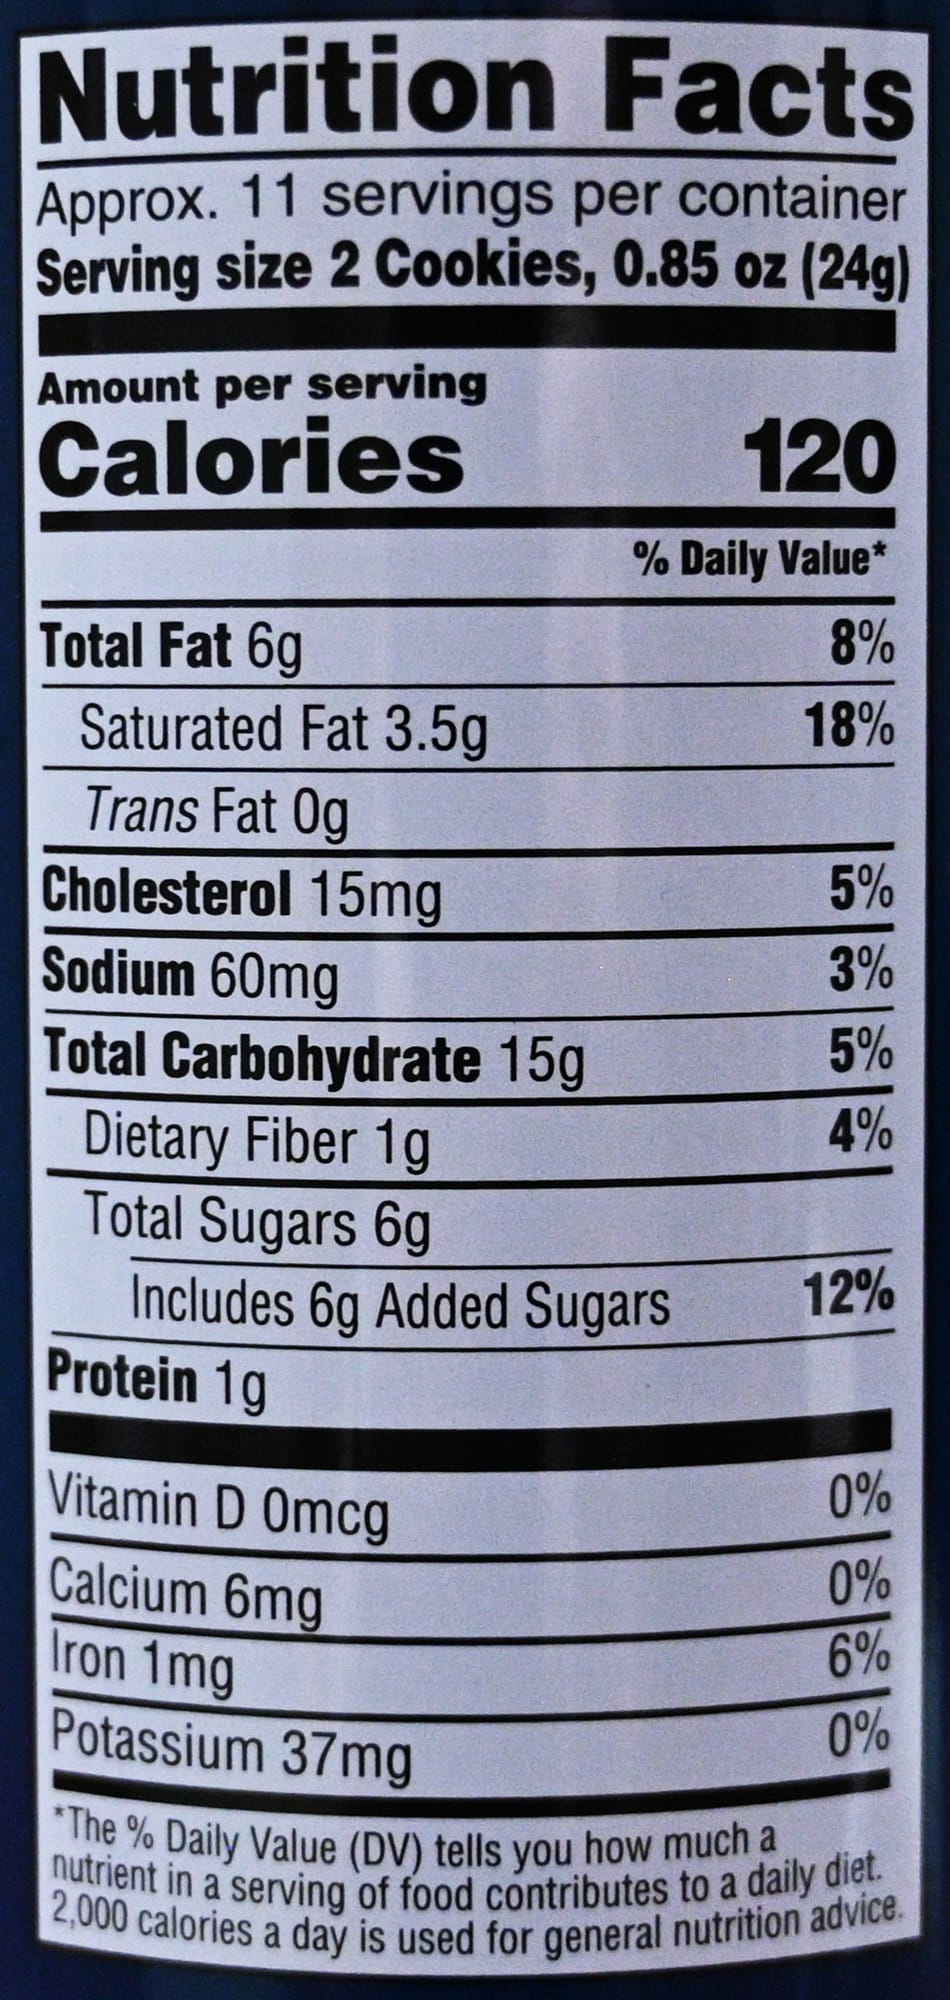 Image of the nutrition facts for the cookies from the back of the tin.